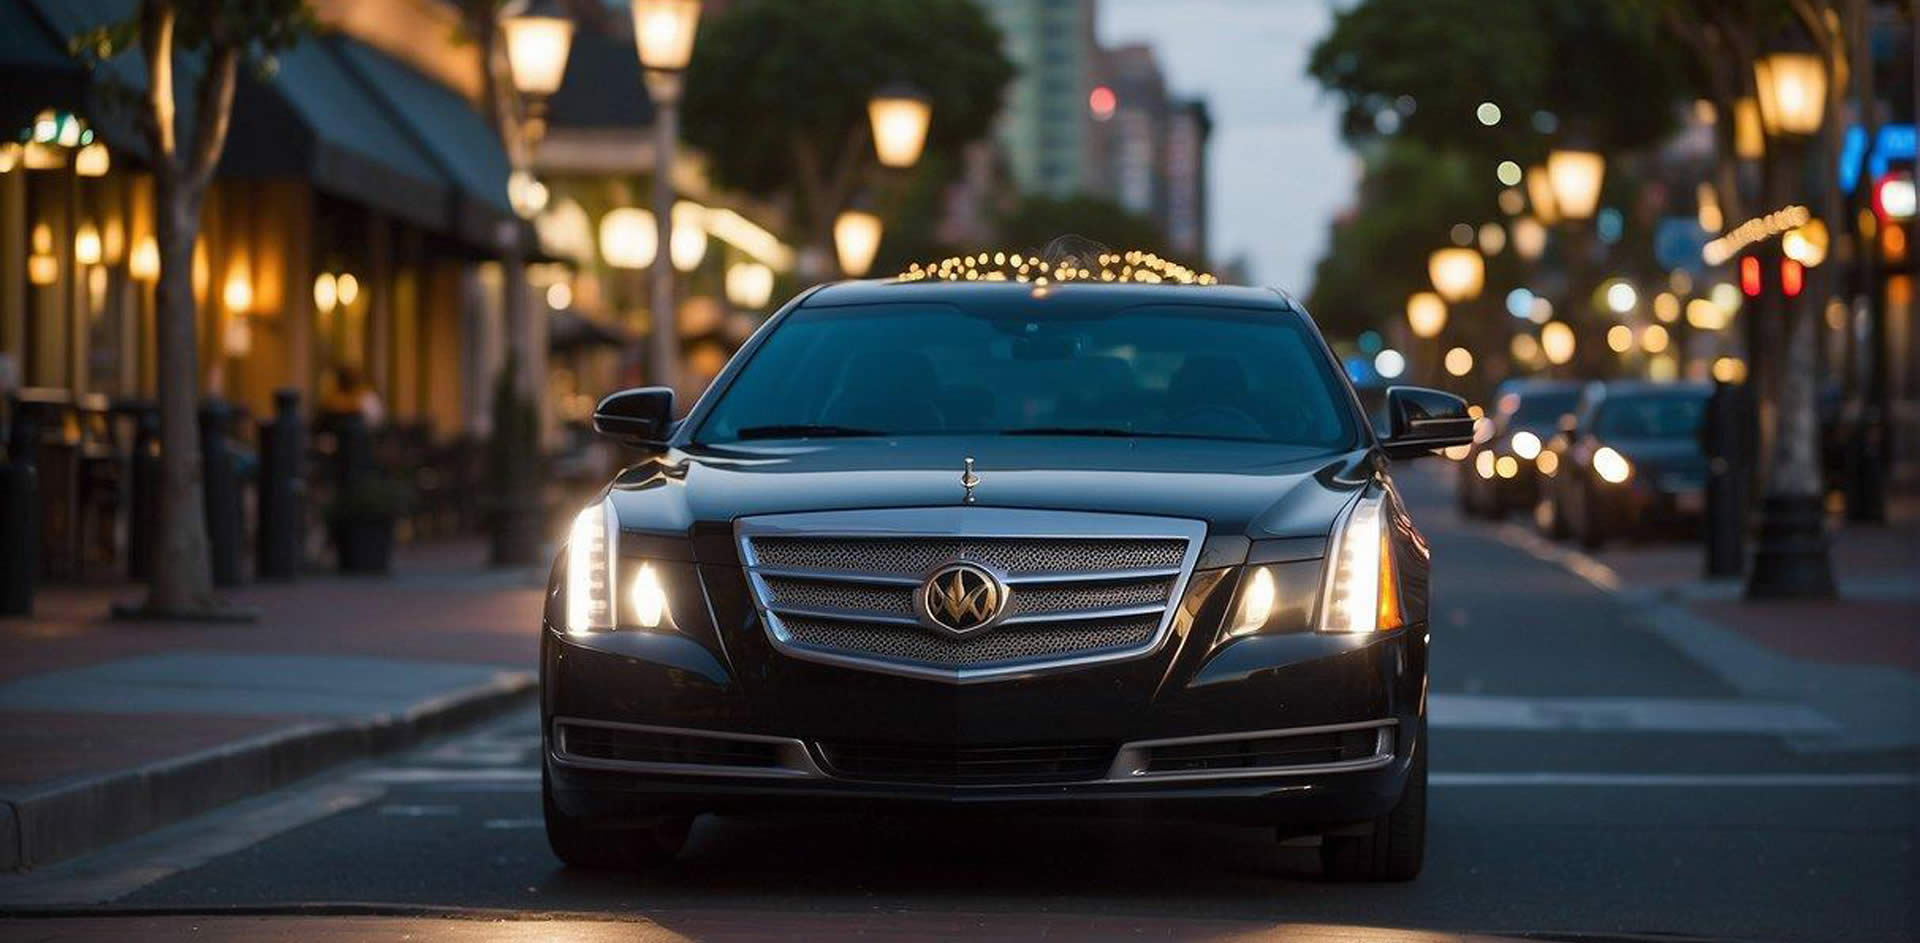 A sleek limousine pulls up to a vibrant street lined with bustling restaurants and shops in Gaslamp Quarter, San Diego. The city skyline glows in the background as a stylish mode of luxury transportation awaits its passengers